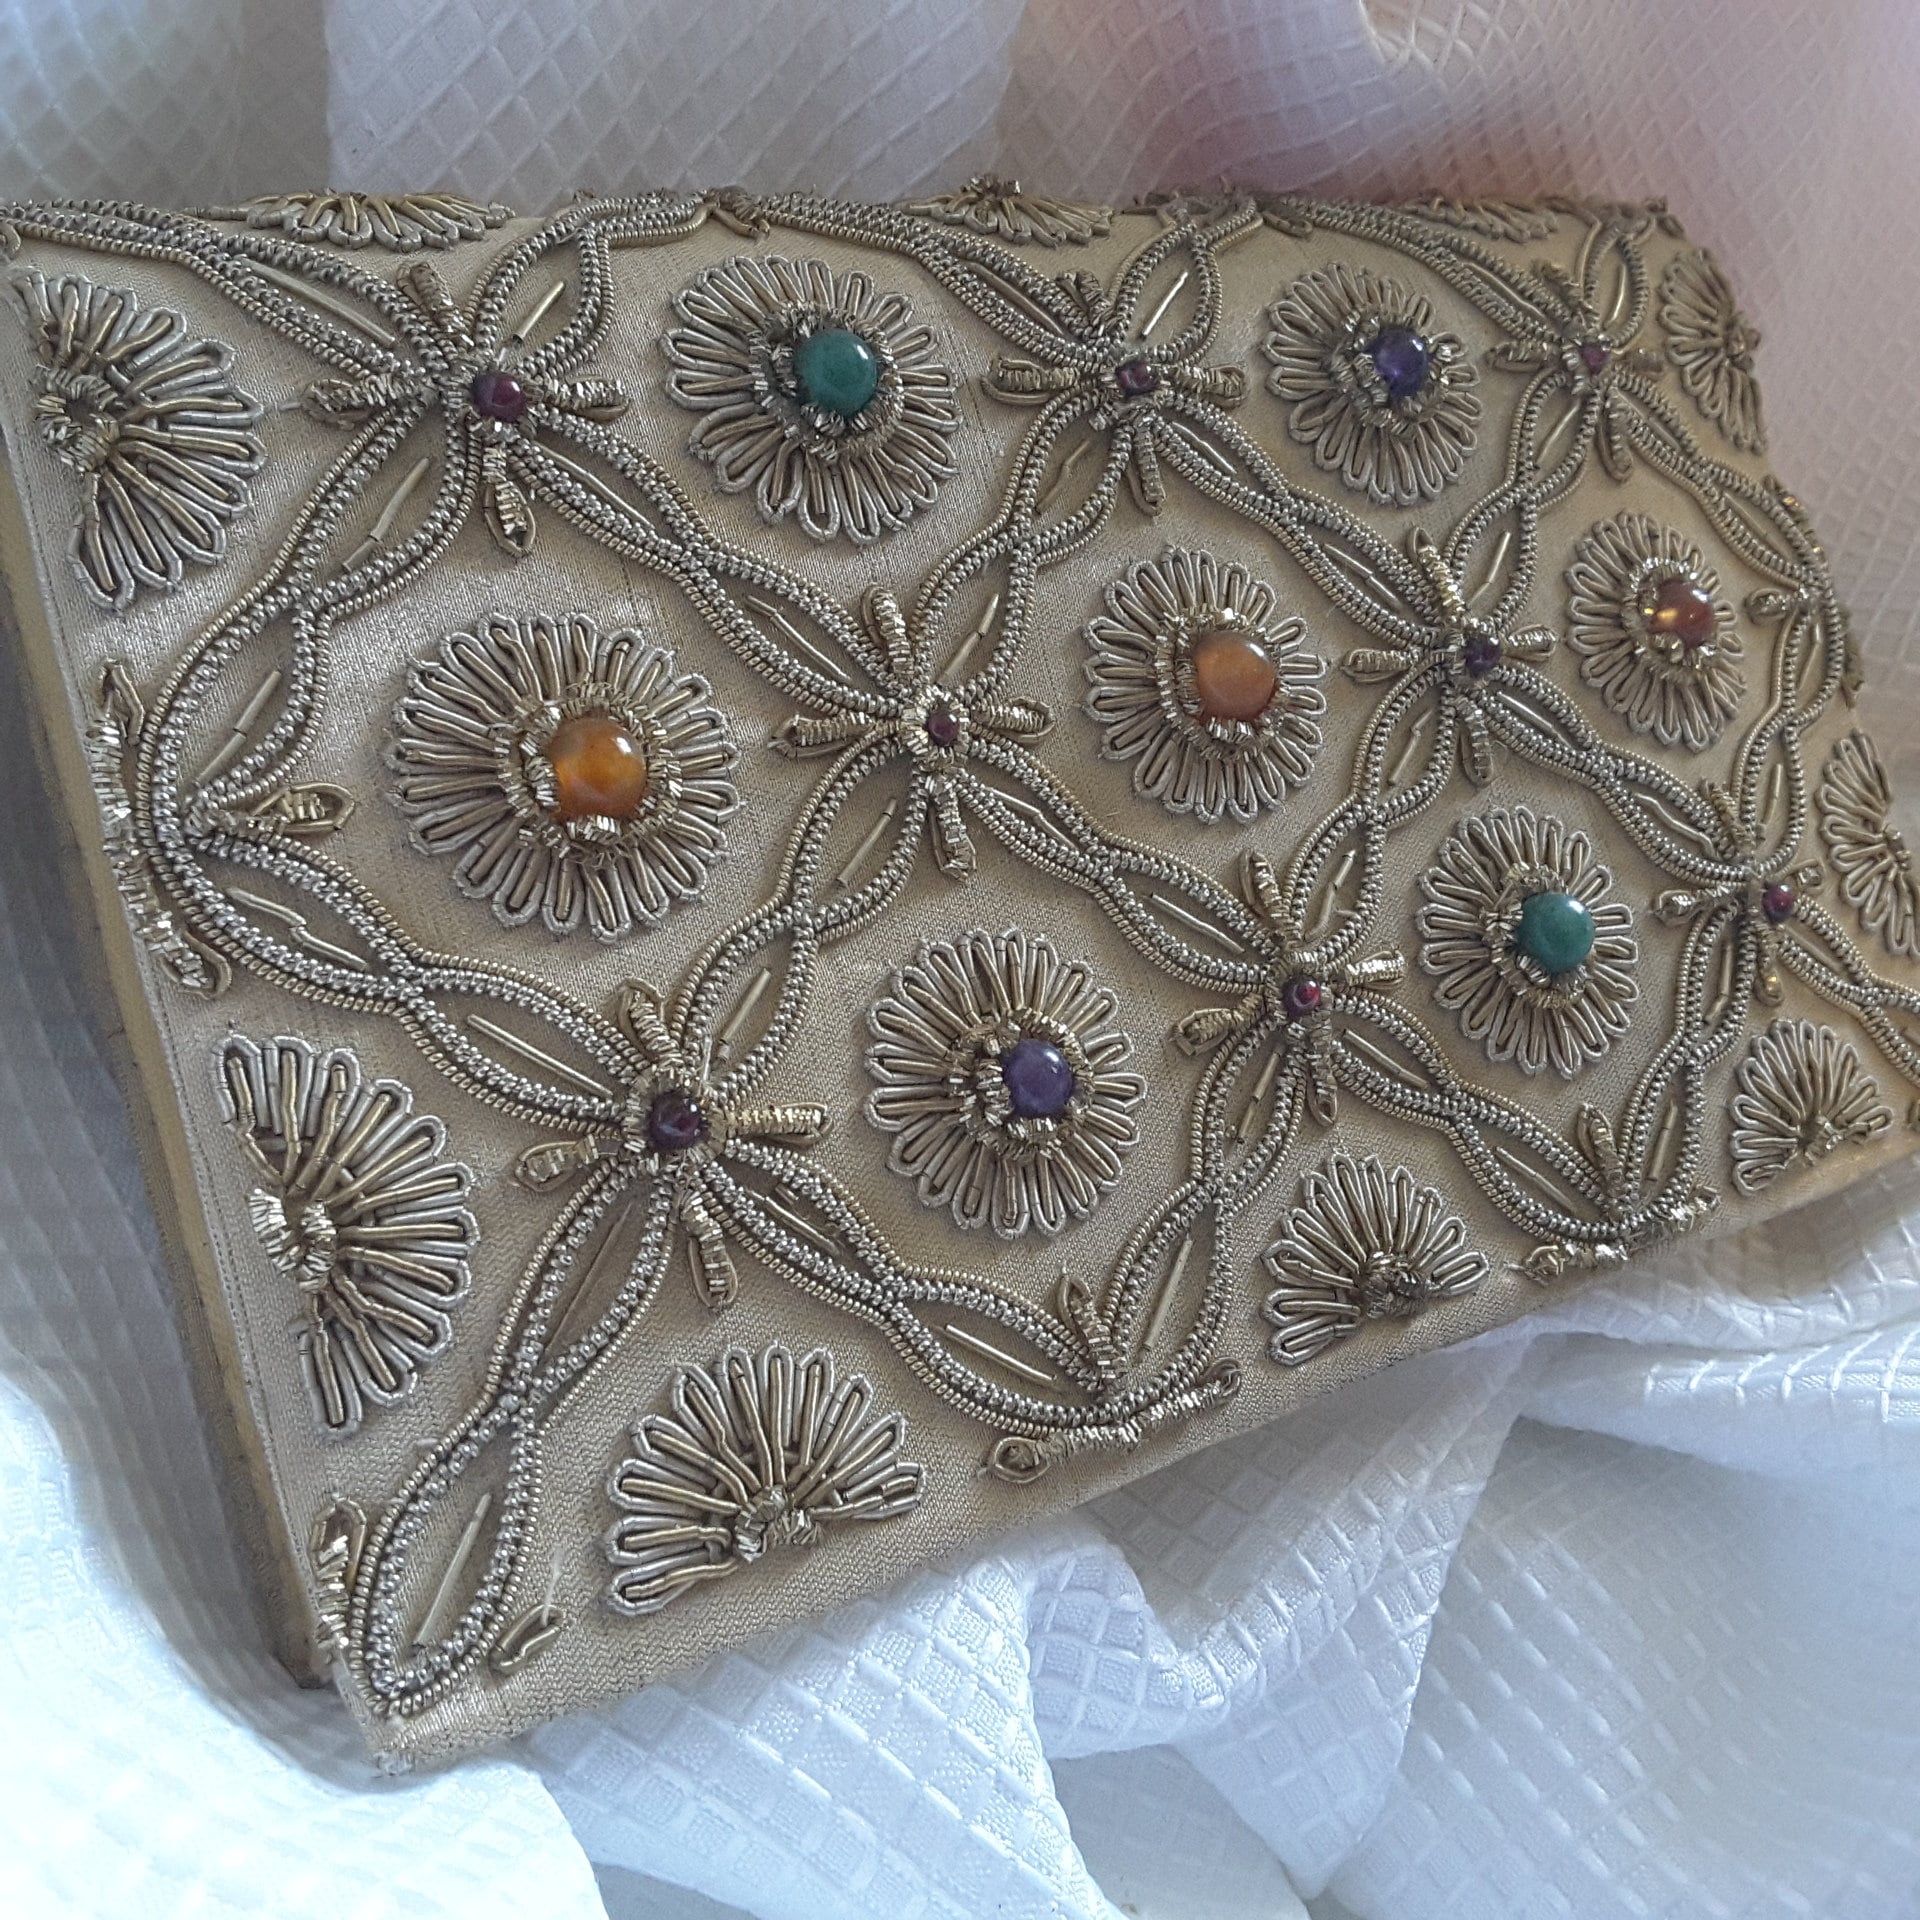 Vintage MM Kane Beaded Sequin Evening Purse Bag Clutch Pearls Made